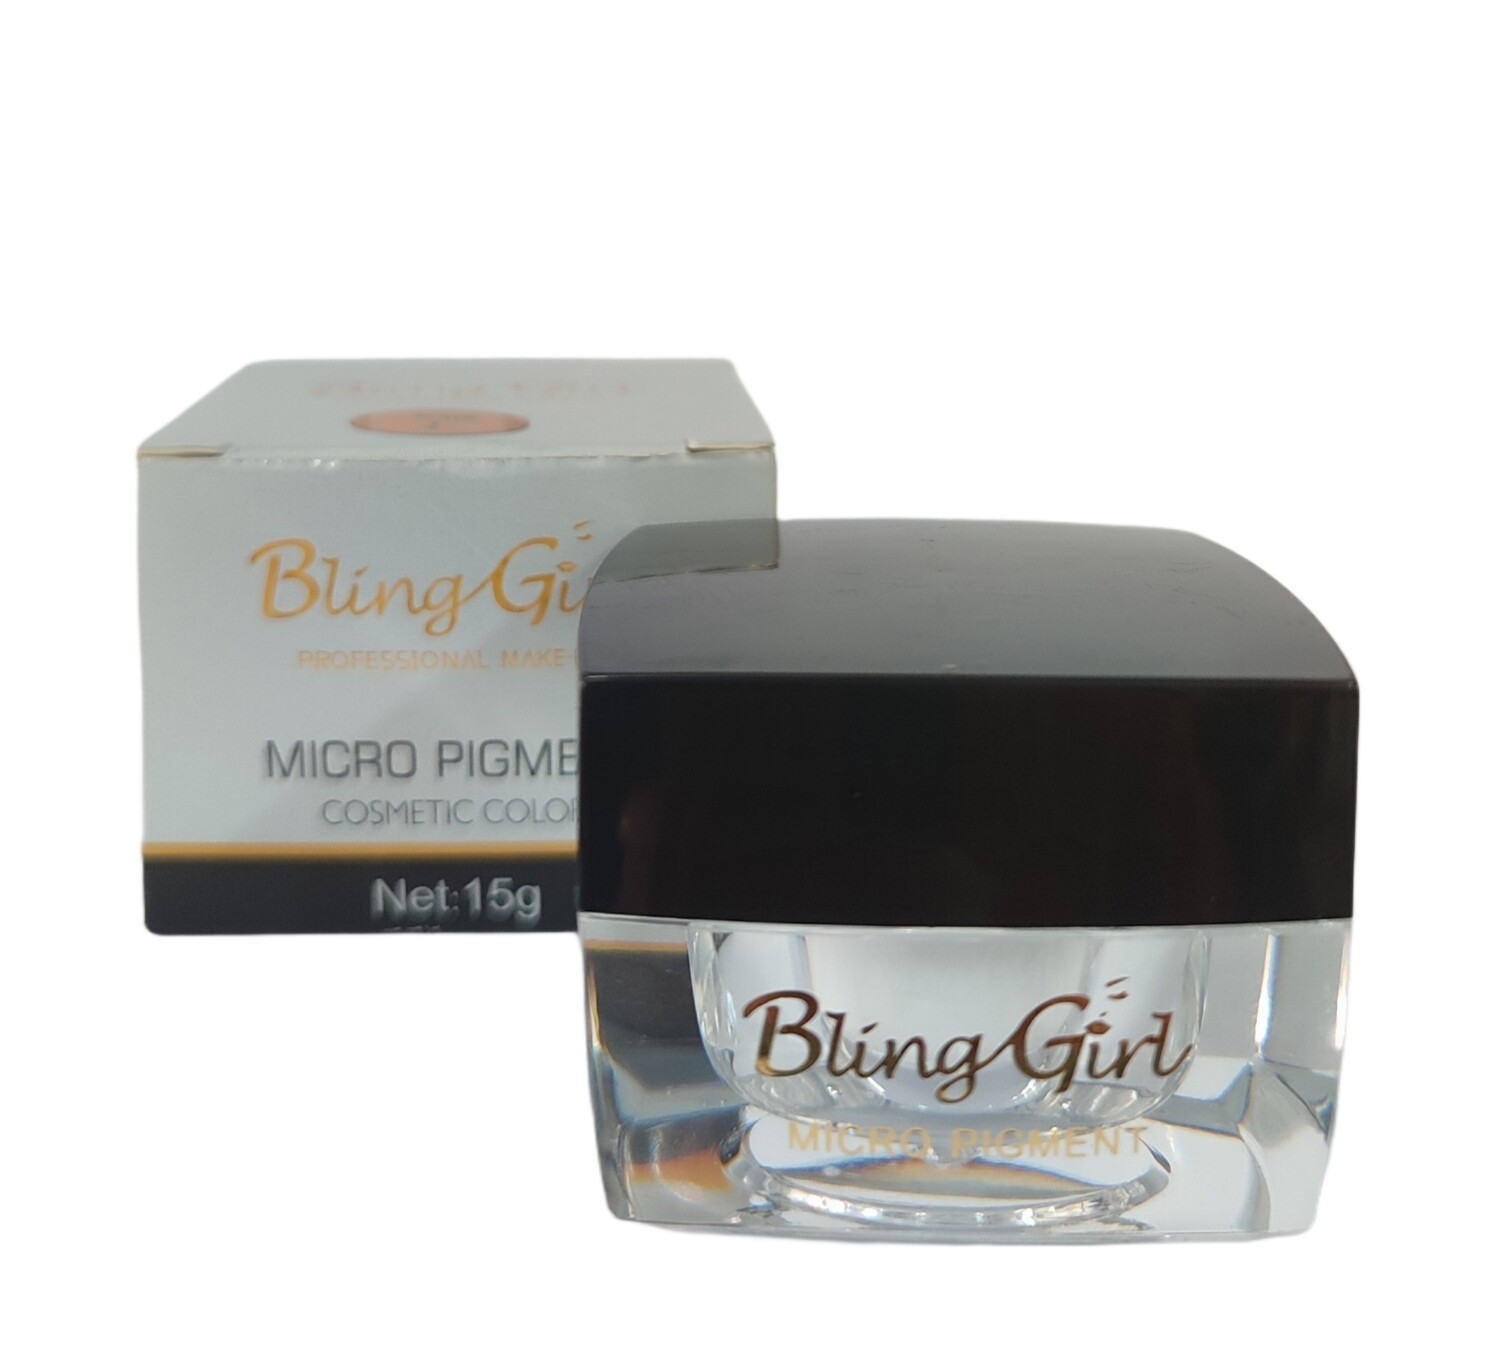 Bling Girl 15g Micro Pigment for Microblading